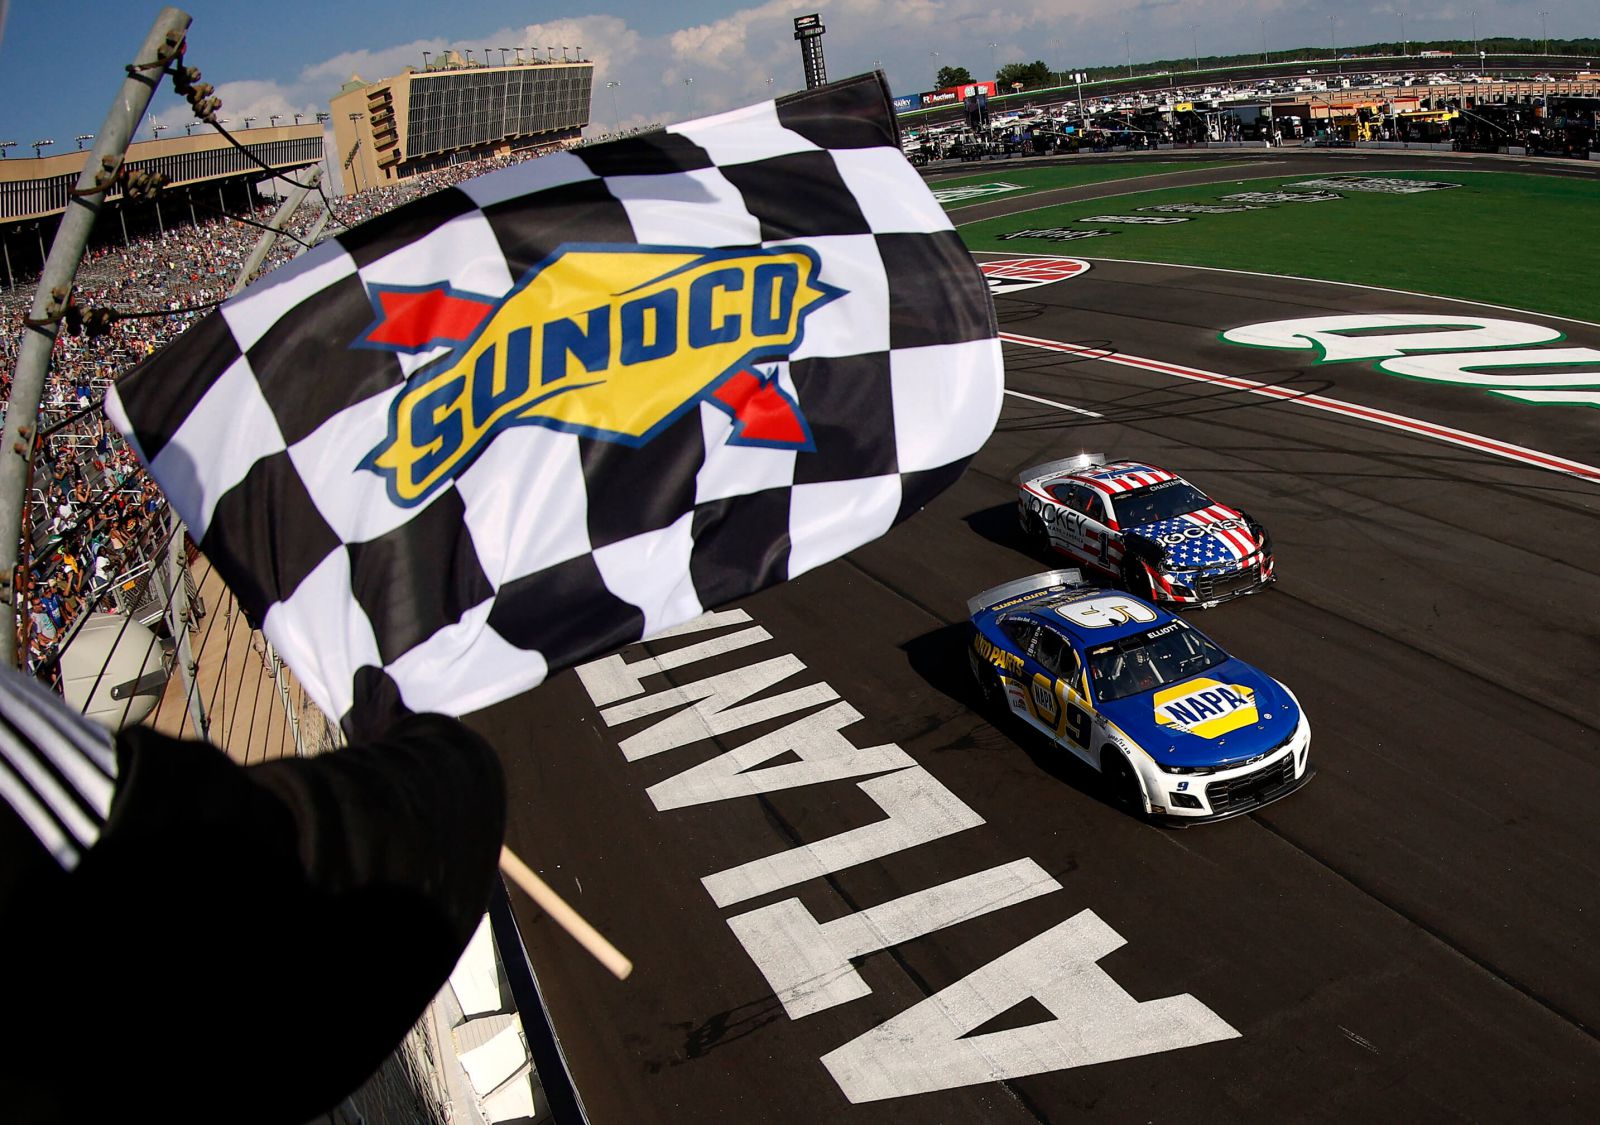 Race cars on track with Nascar official waving Sunoco checkered flag